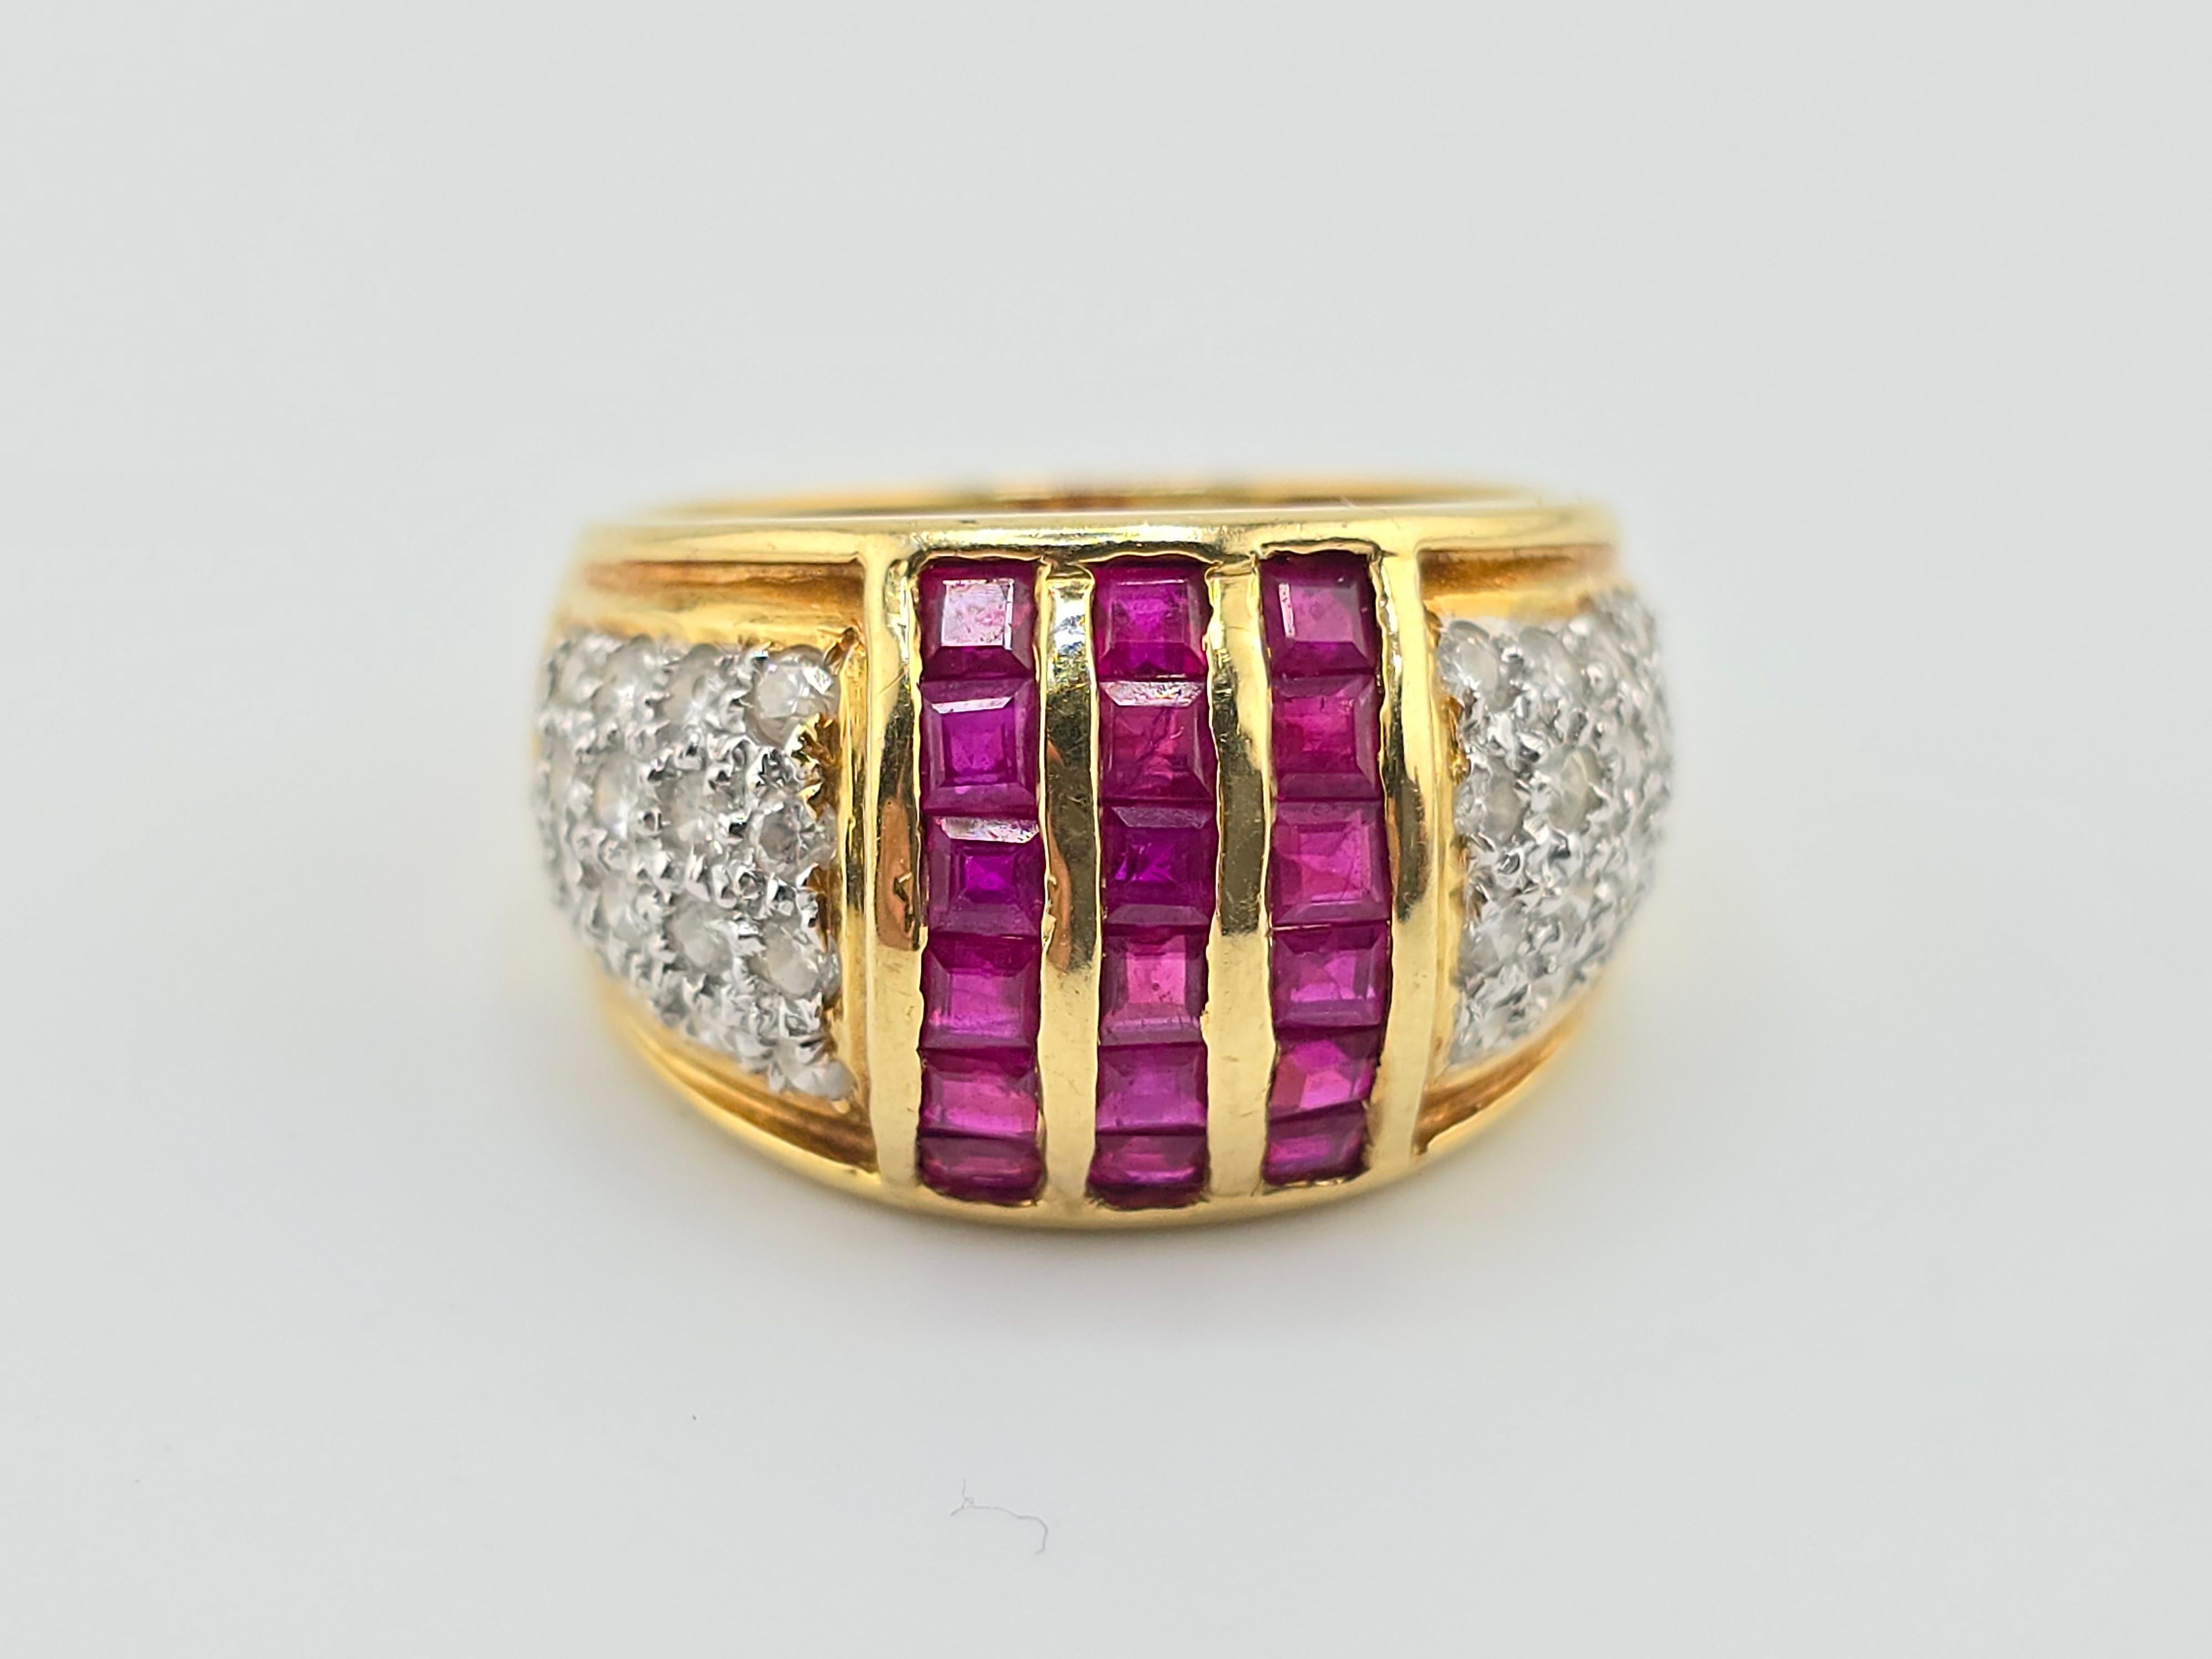 Unique Vintage Ruby & Diamond 18K Yellow Gold Ring 8.05 Grams In Good Condition For Sale In Media, PA